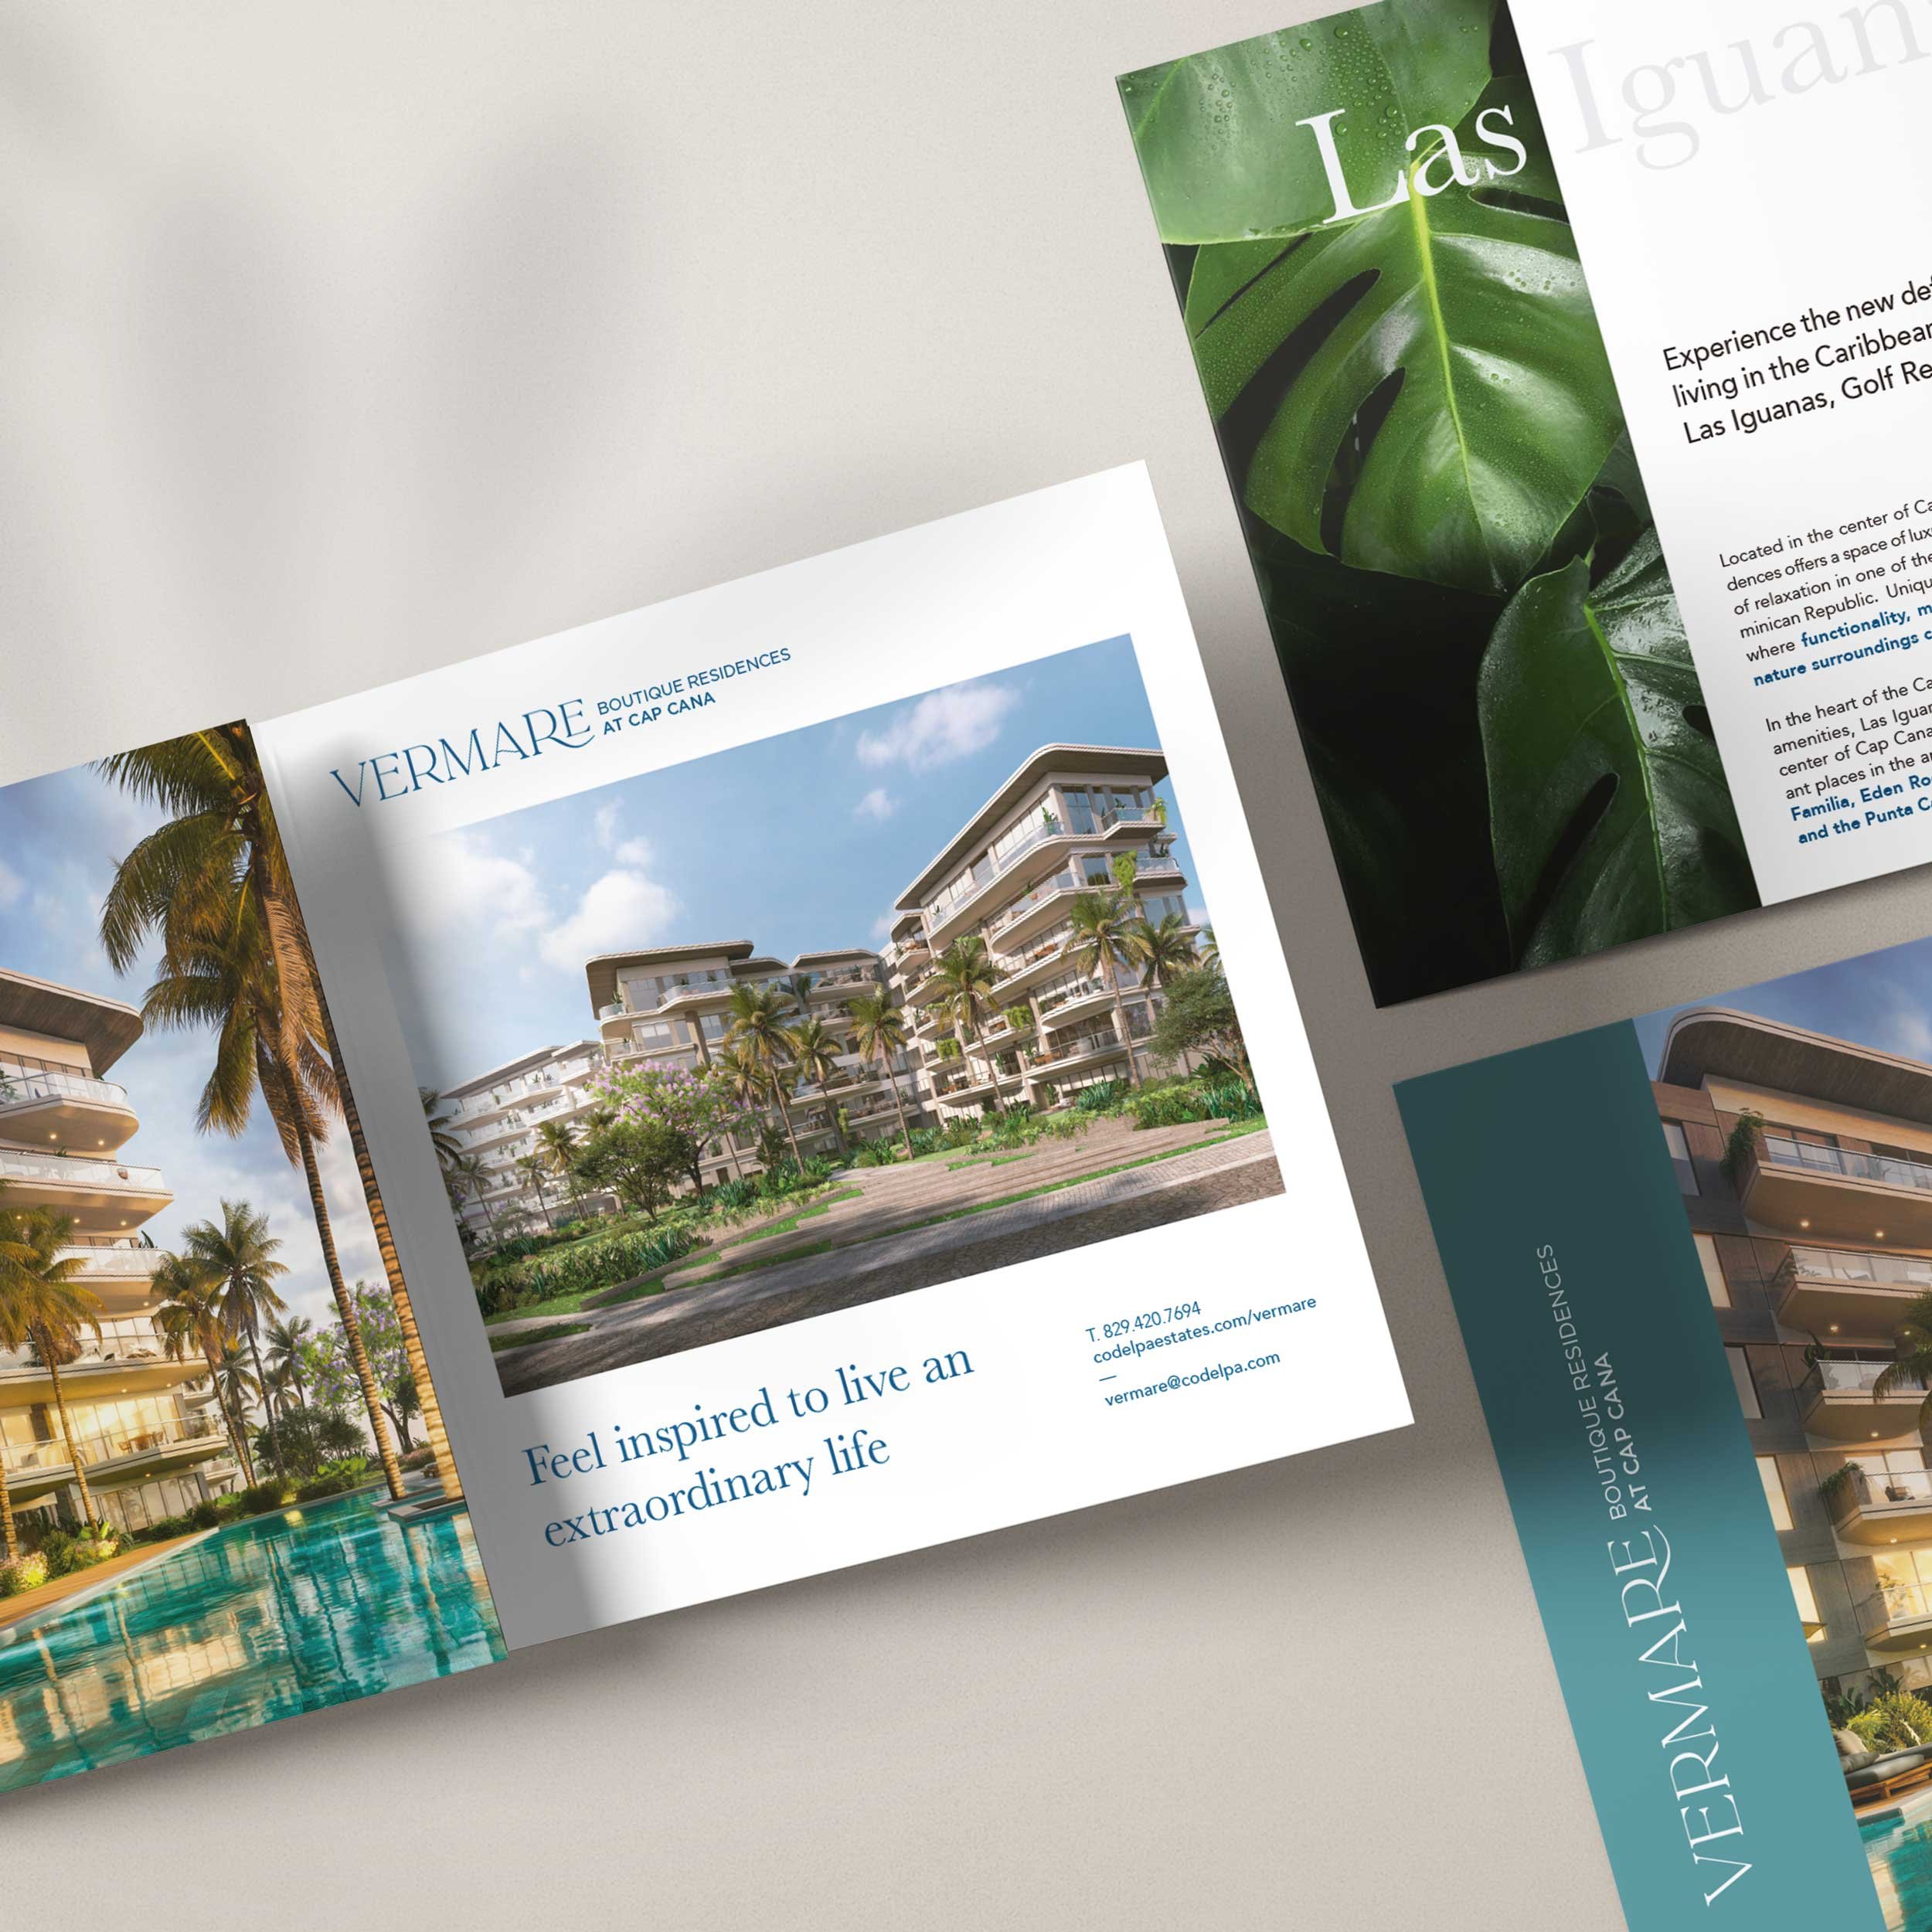 behagen-Branding-and-Marketing-for-Real-Estate-Vermare-at-Cap-Cana-Cover.jpg